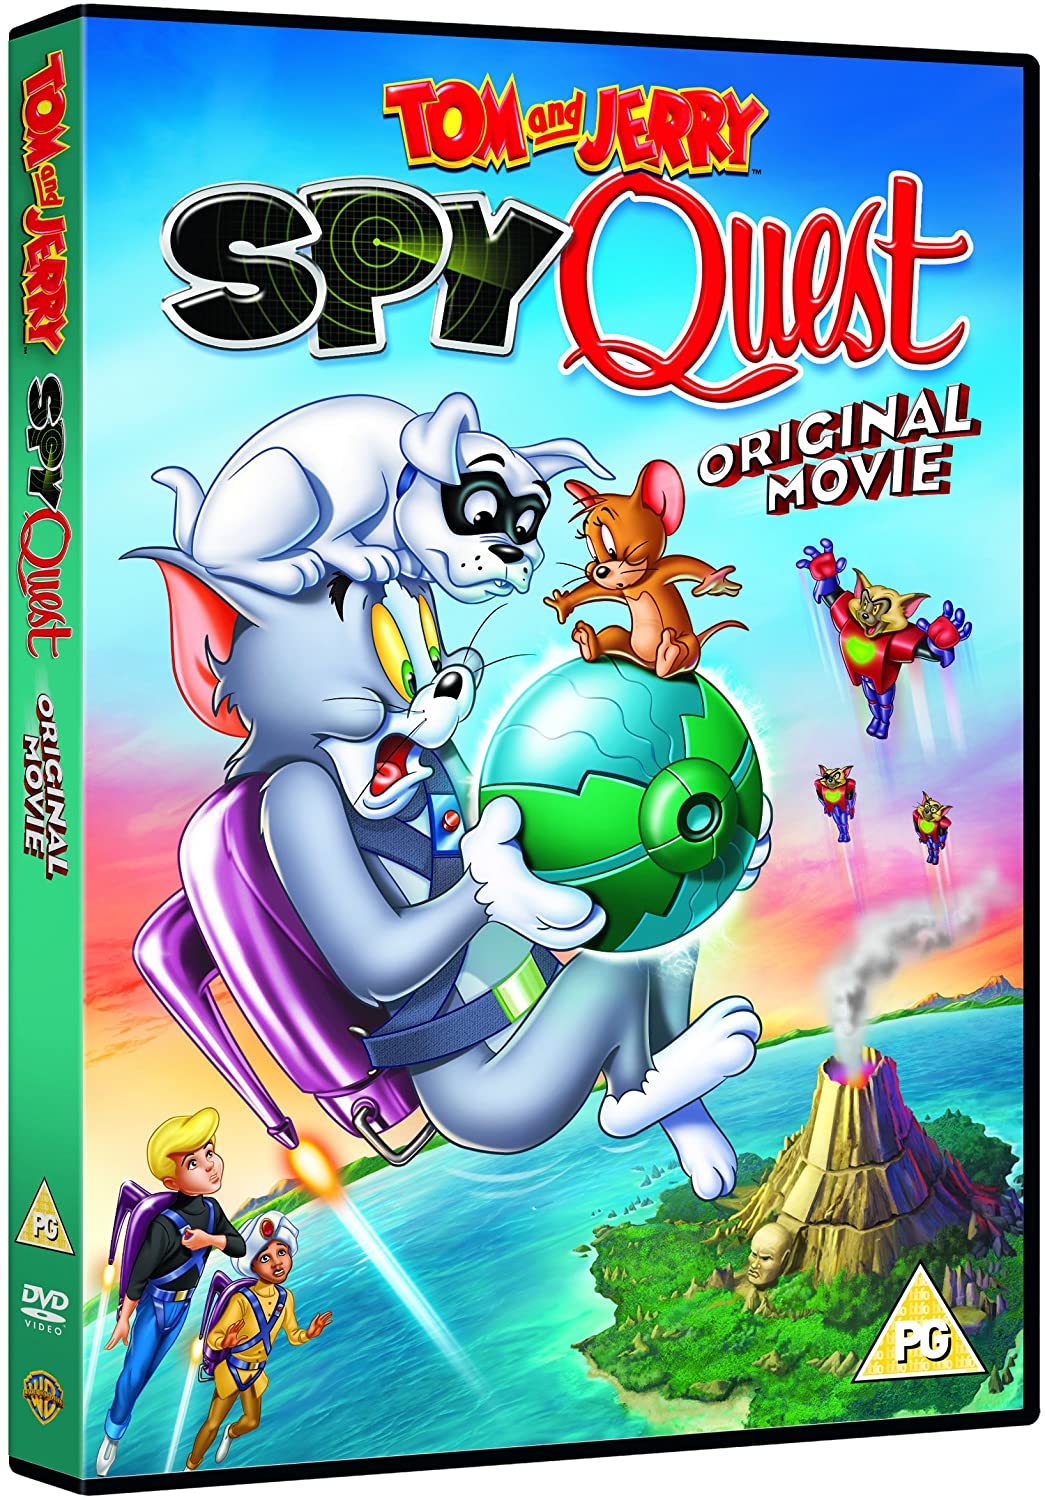 Tom And Jerry: Spy Quest [2015] - Family/Musical [DVD]